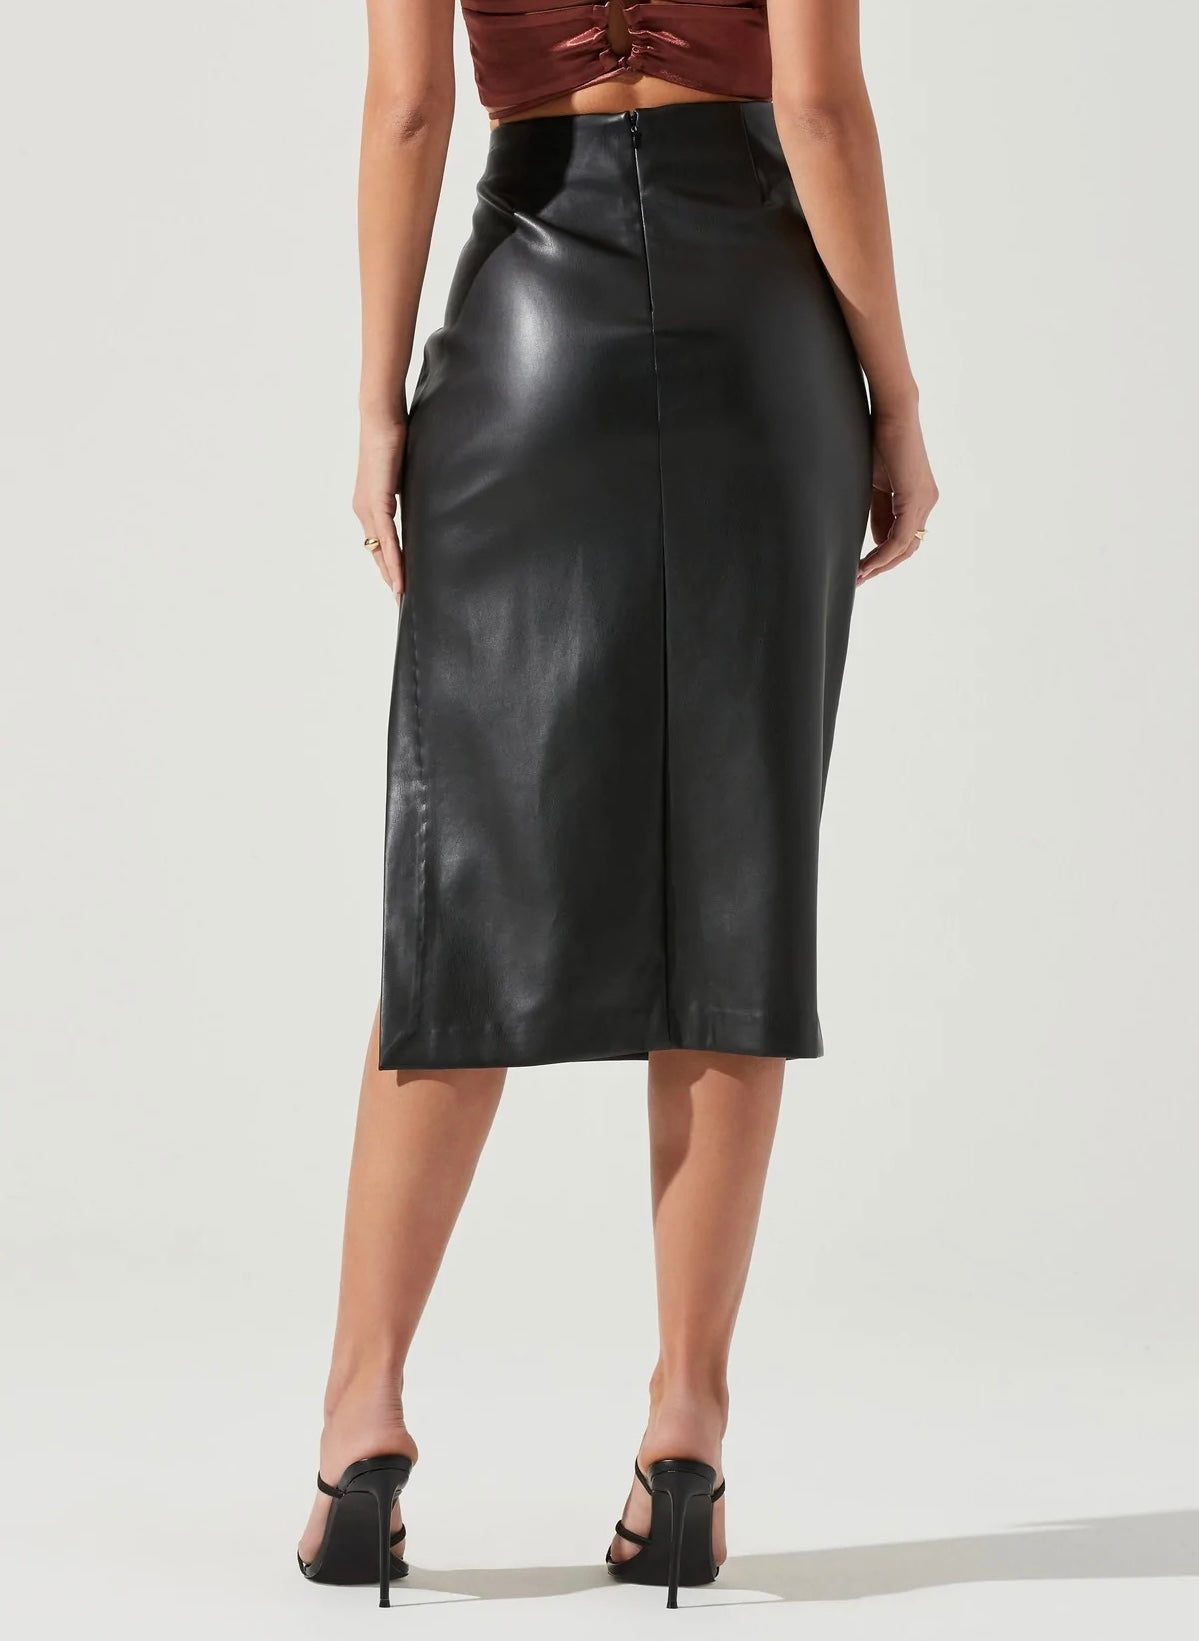 ASTR Melody Leather Skirt